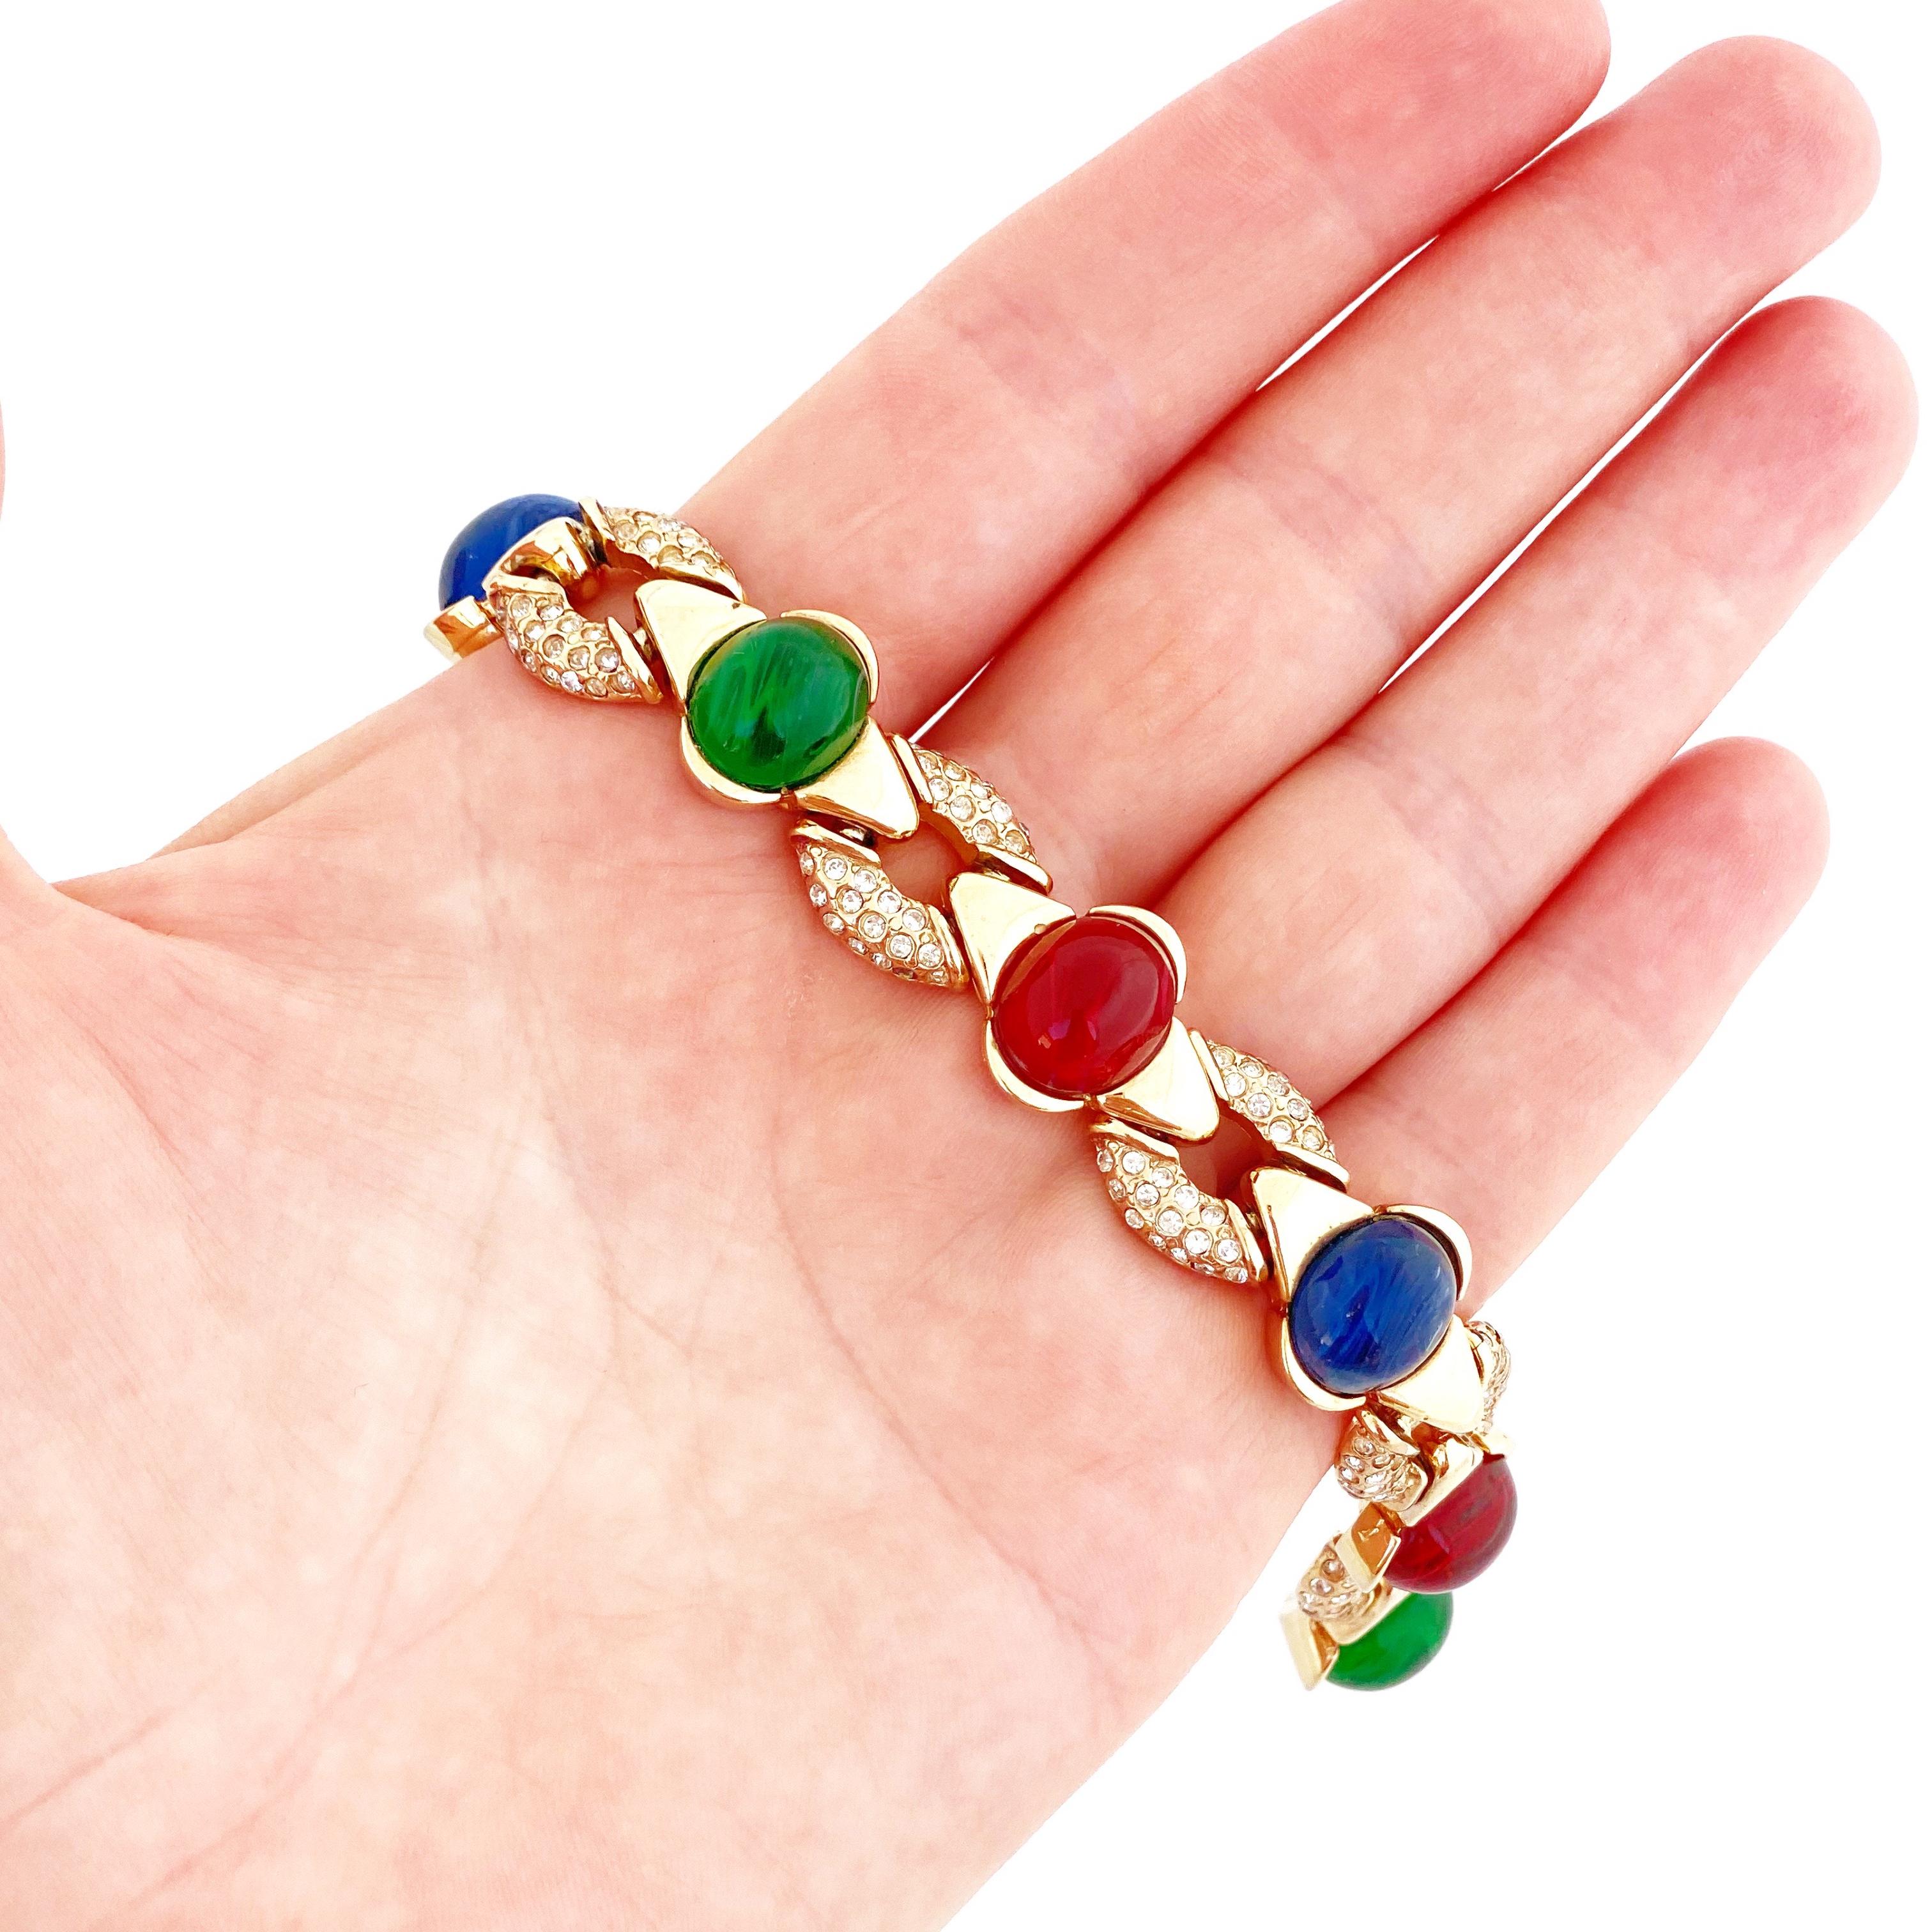 Modern Jewels Of India Mughal Gripoix Glass Bracelet With Crystal Pavé, 1960s For Sale